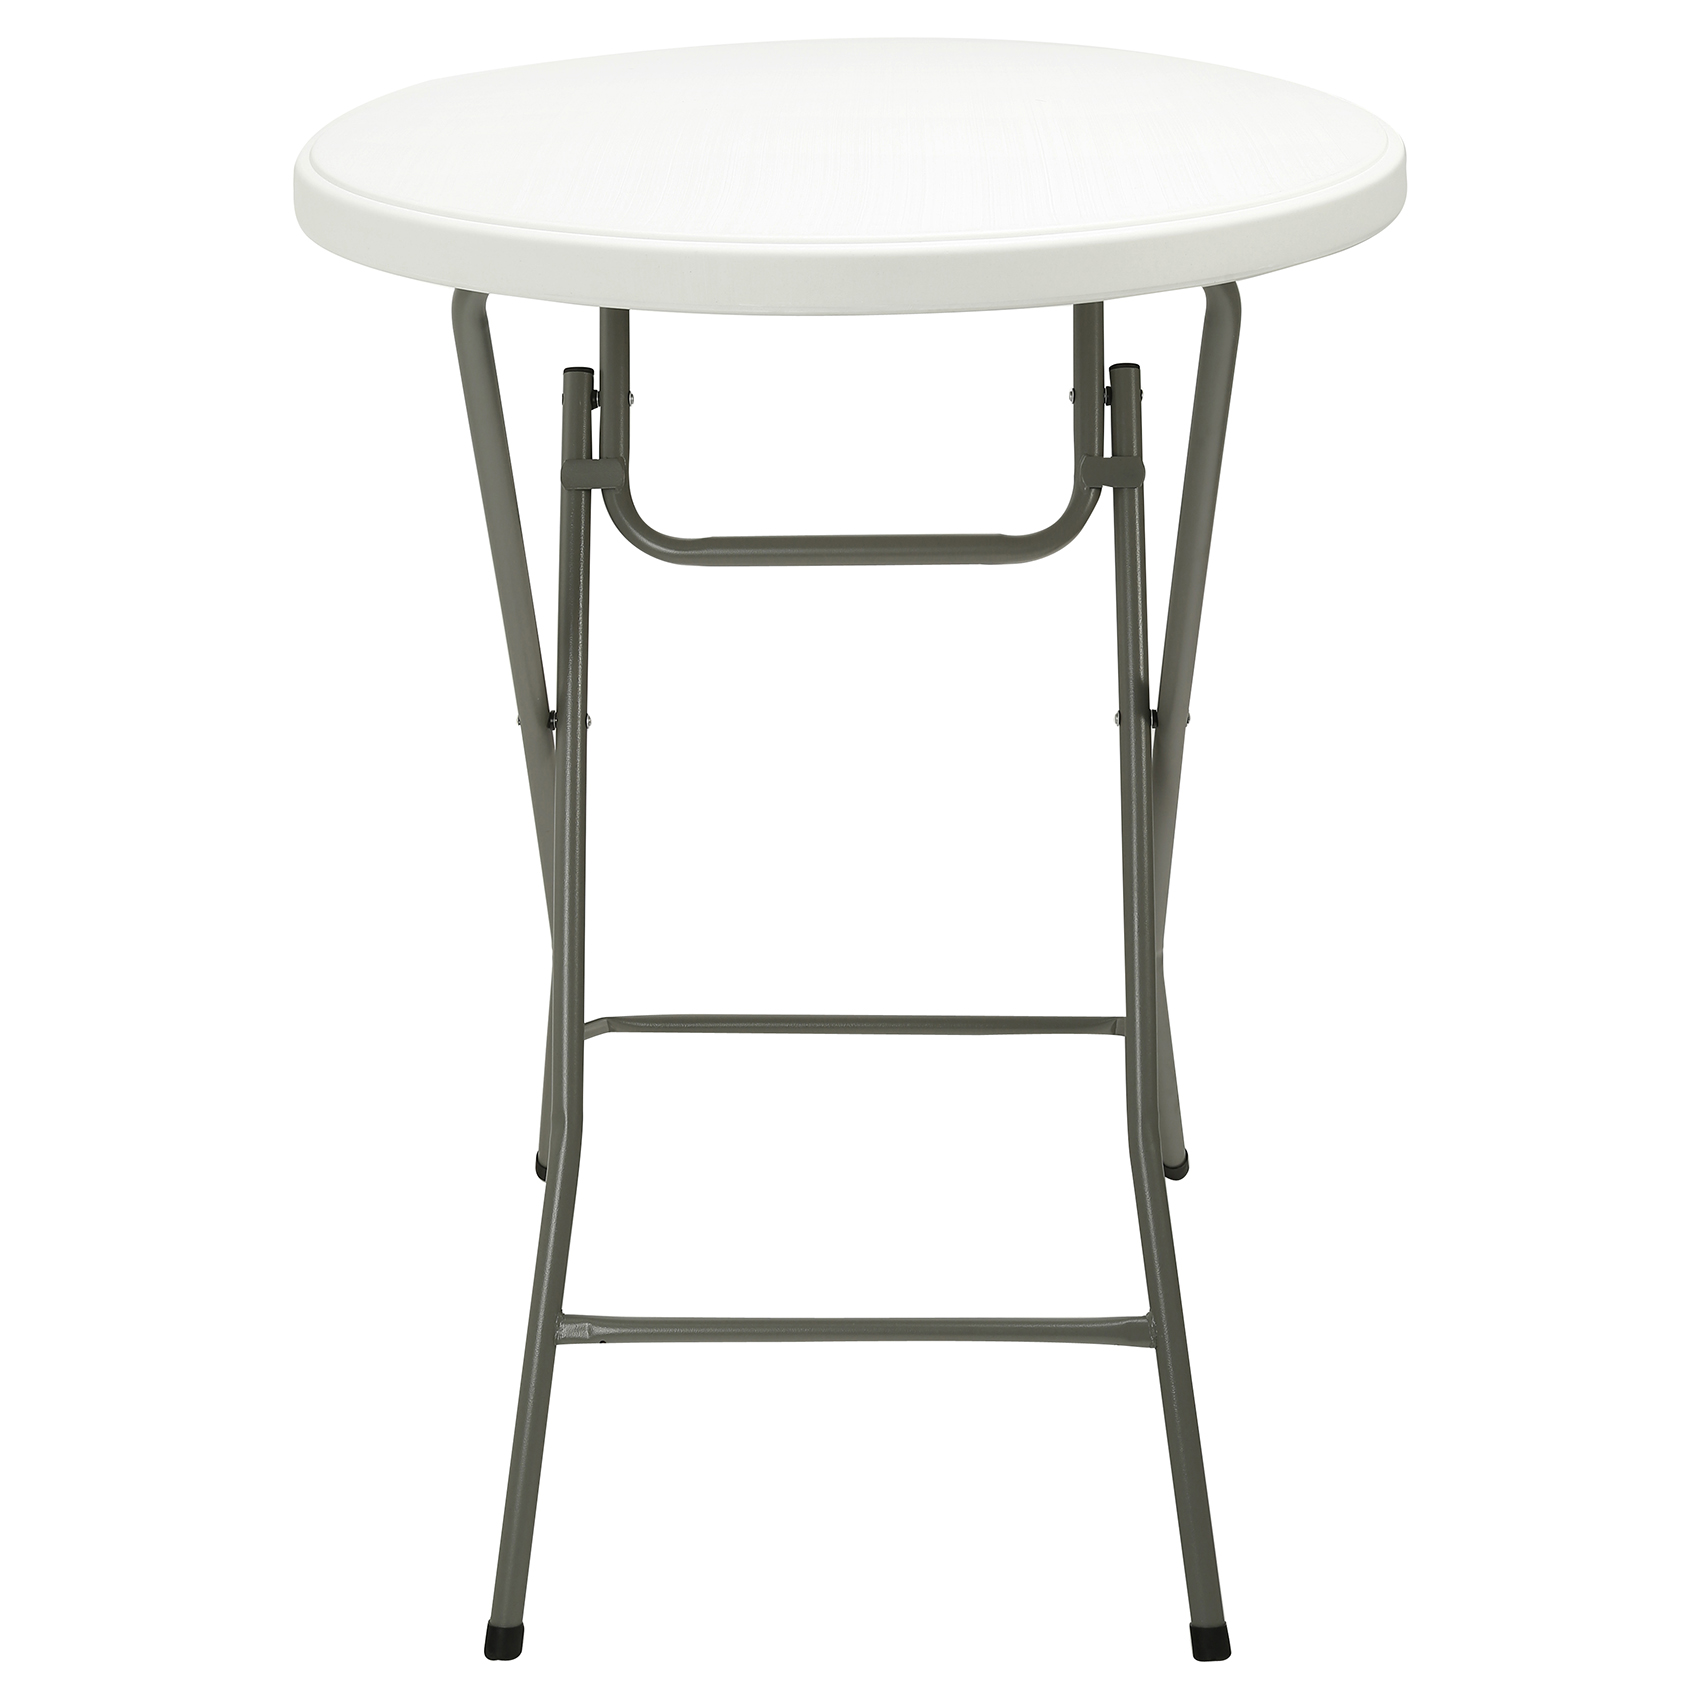 31.5" Portable Round Plastic Folding High Top Cocktail Table Offwhite